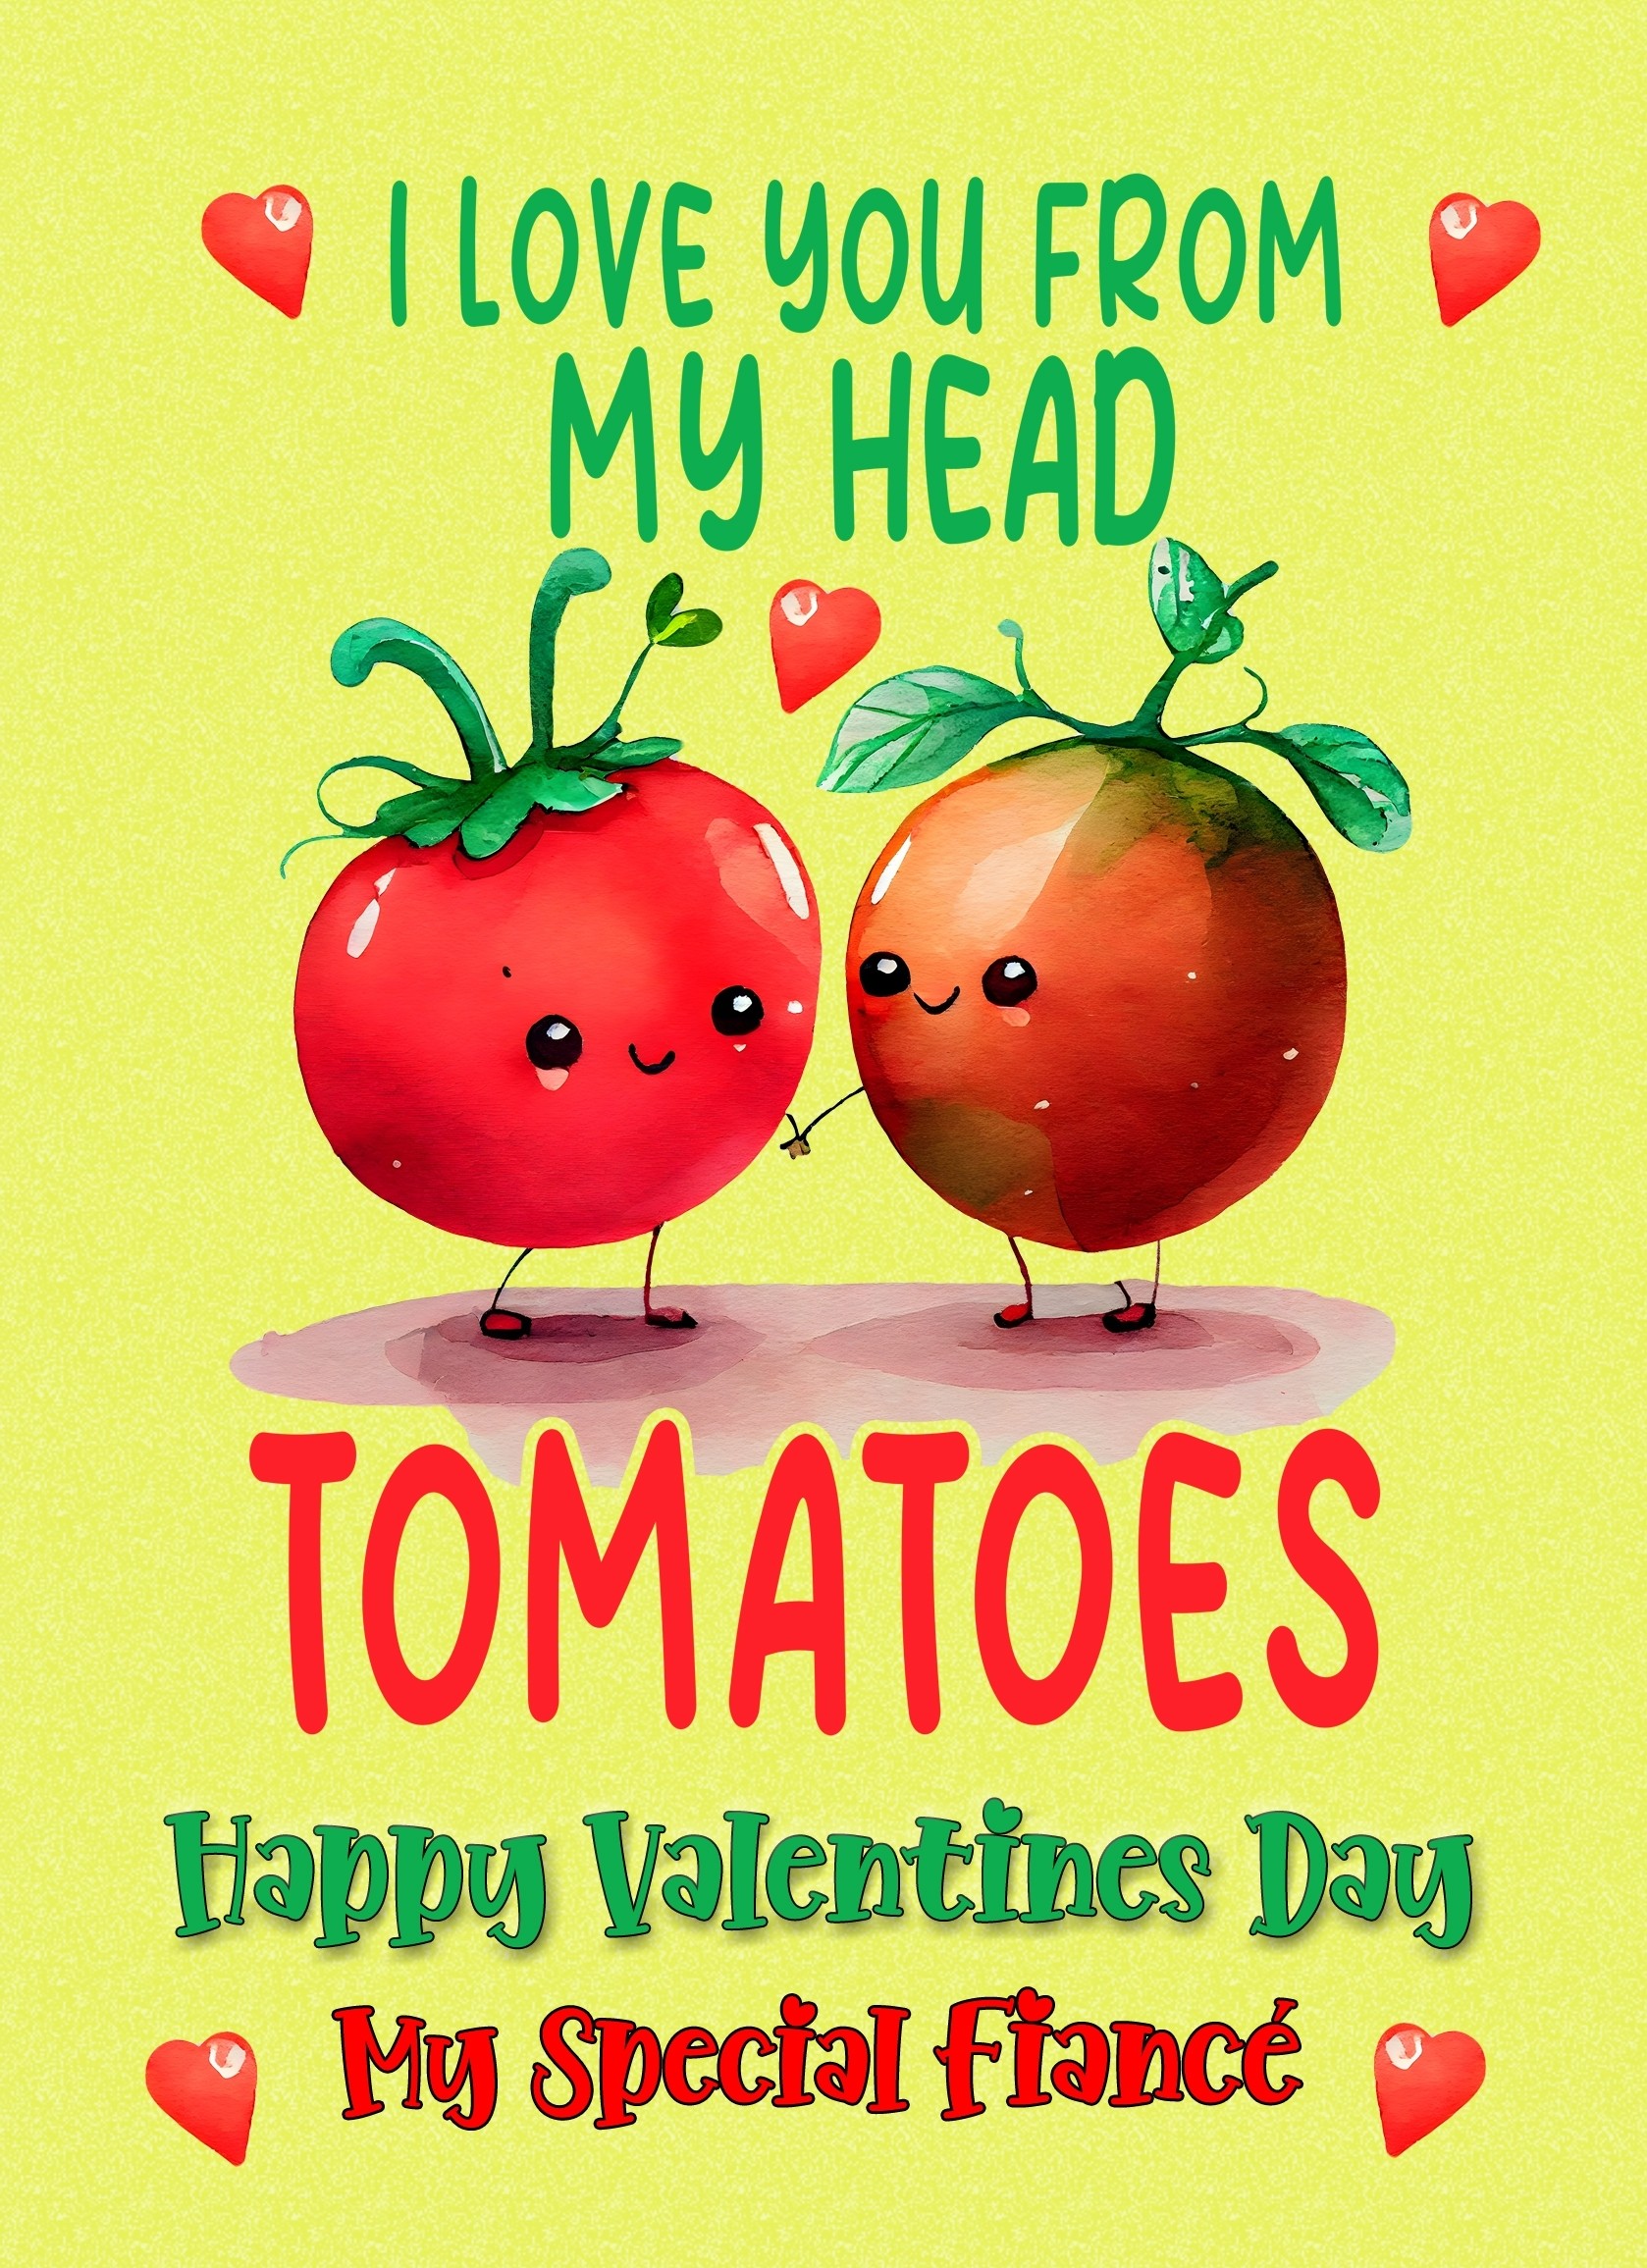 Funny Pun Valentines Day Card for Fiance (Tomatoes)